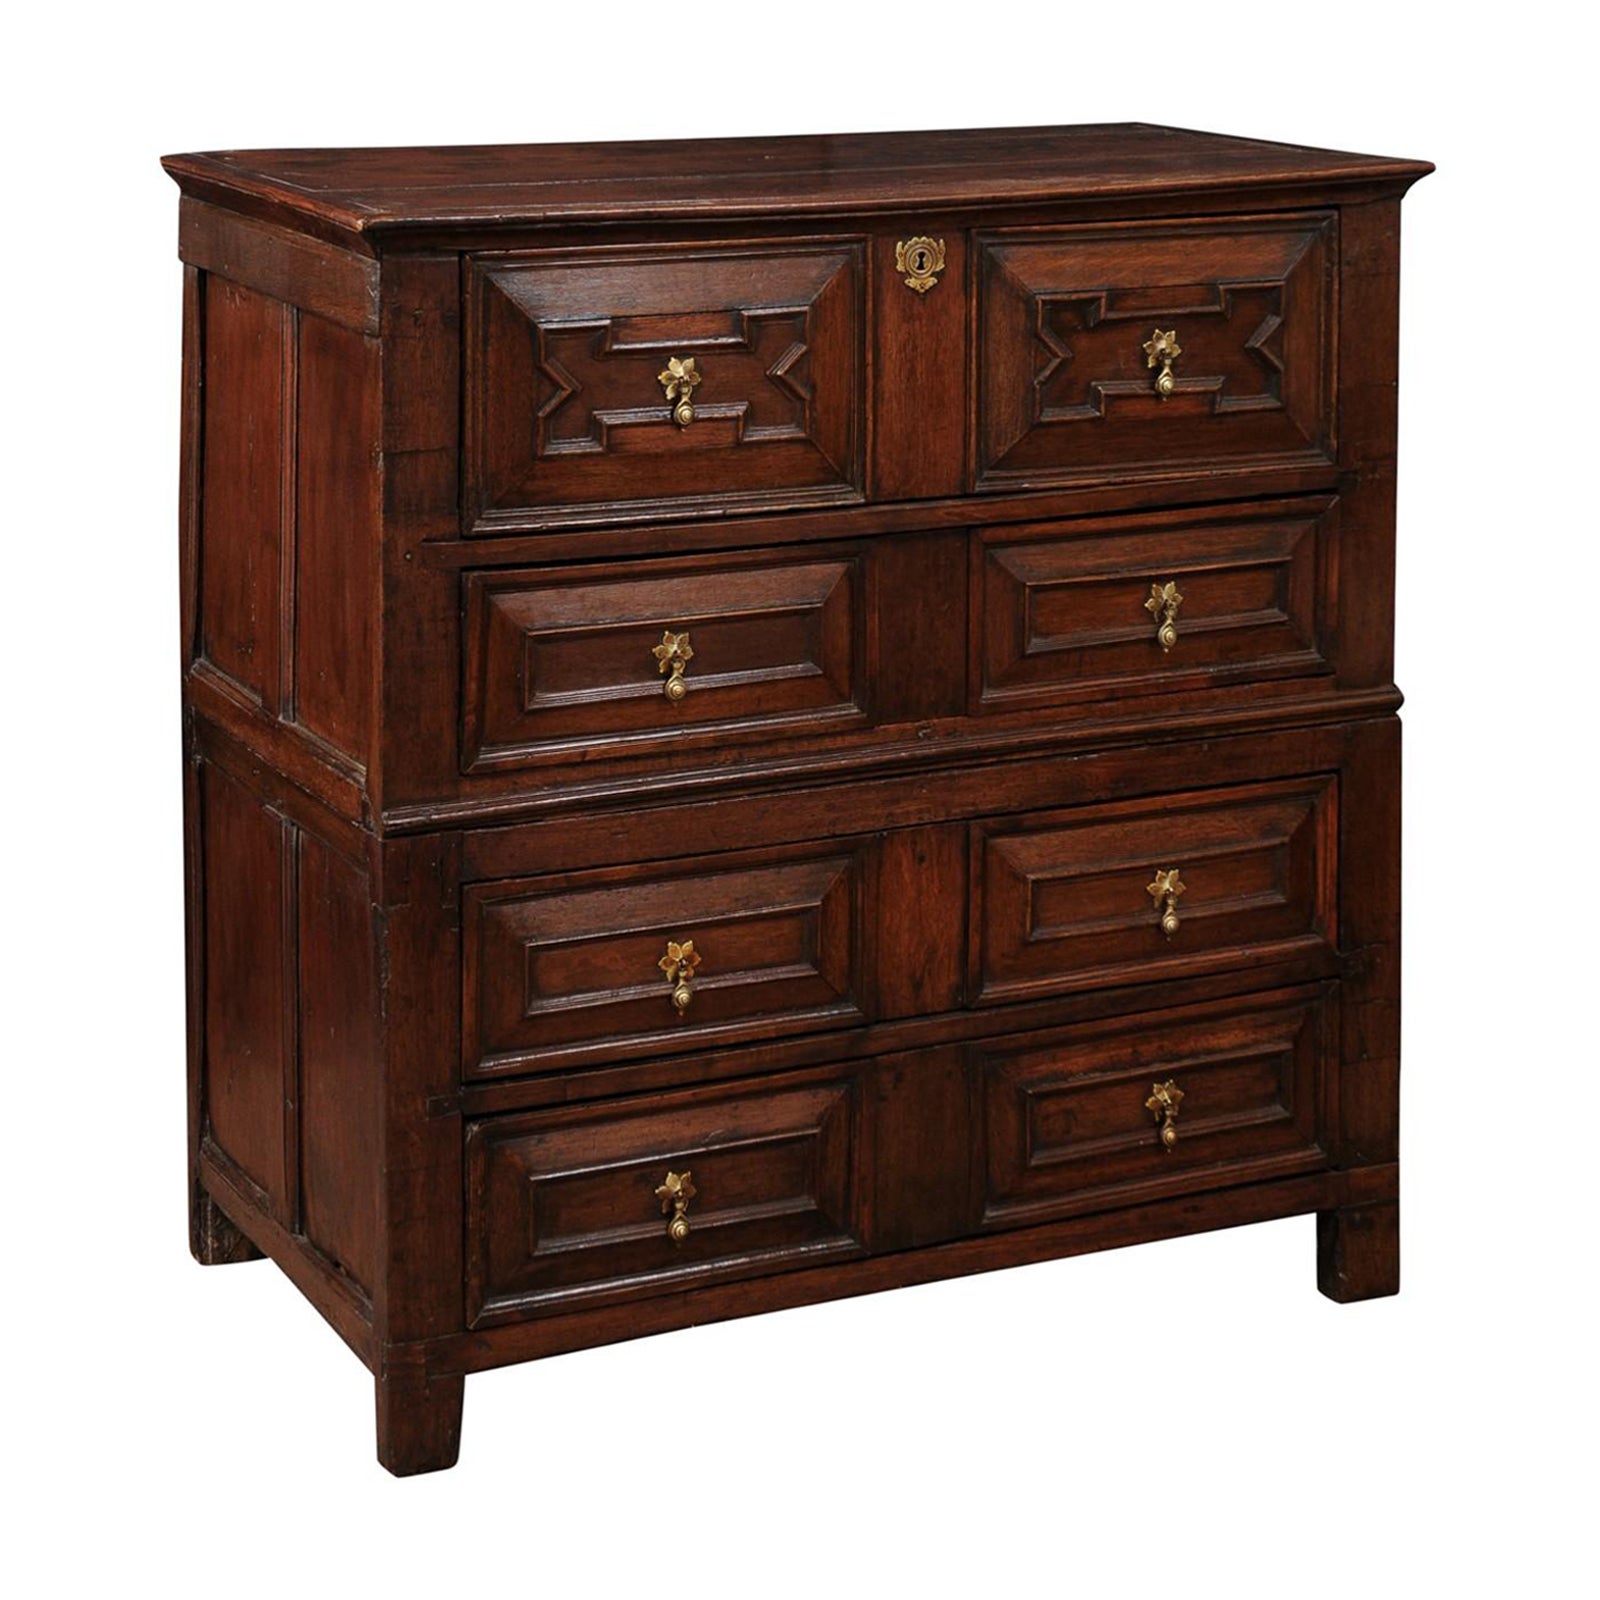 18th Century English Jacobean Style Oak Chest with 4 Drawers